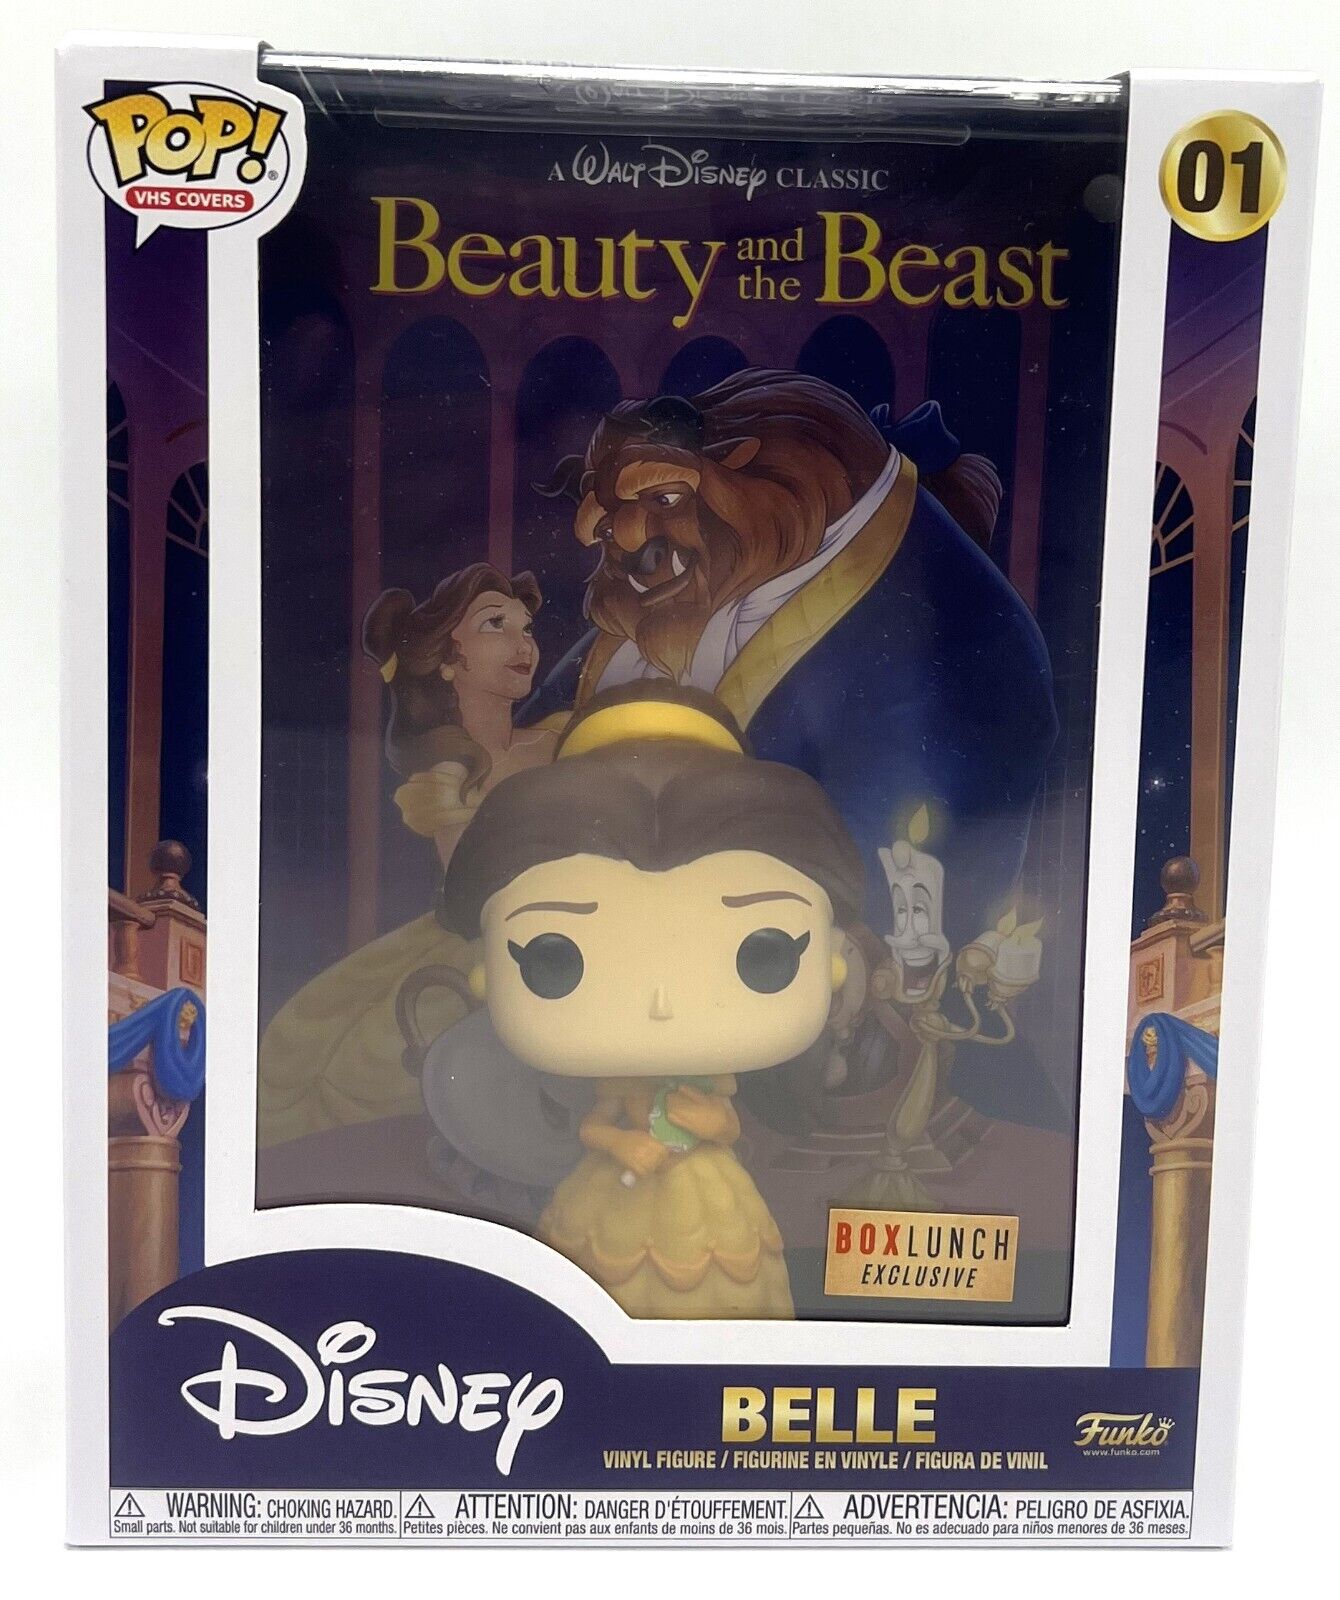 Funko Pop VHS Covers Disney Beauty & the Beast Belle #01 BoxLunch Exclusive NIB